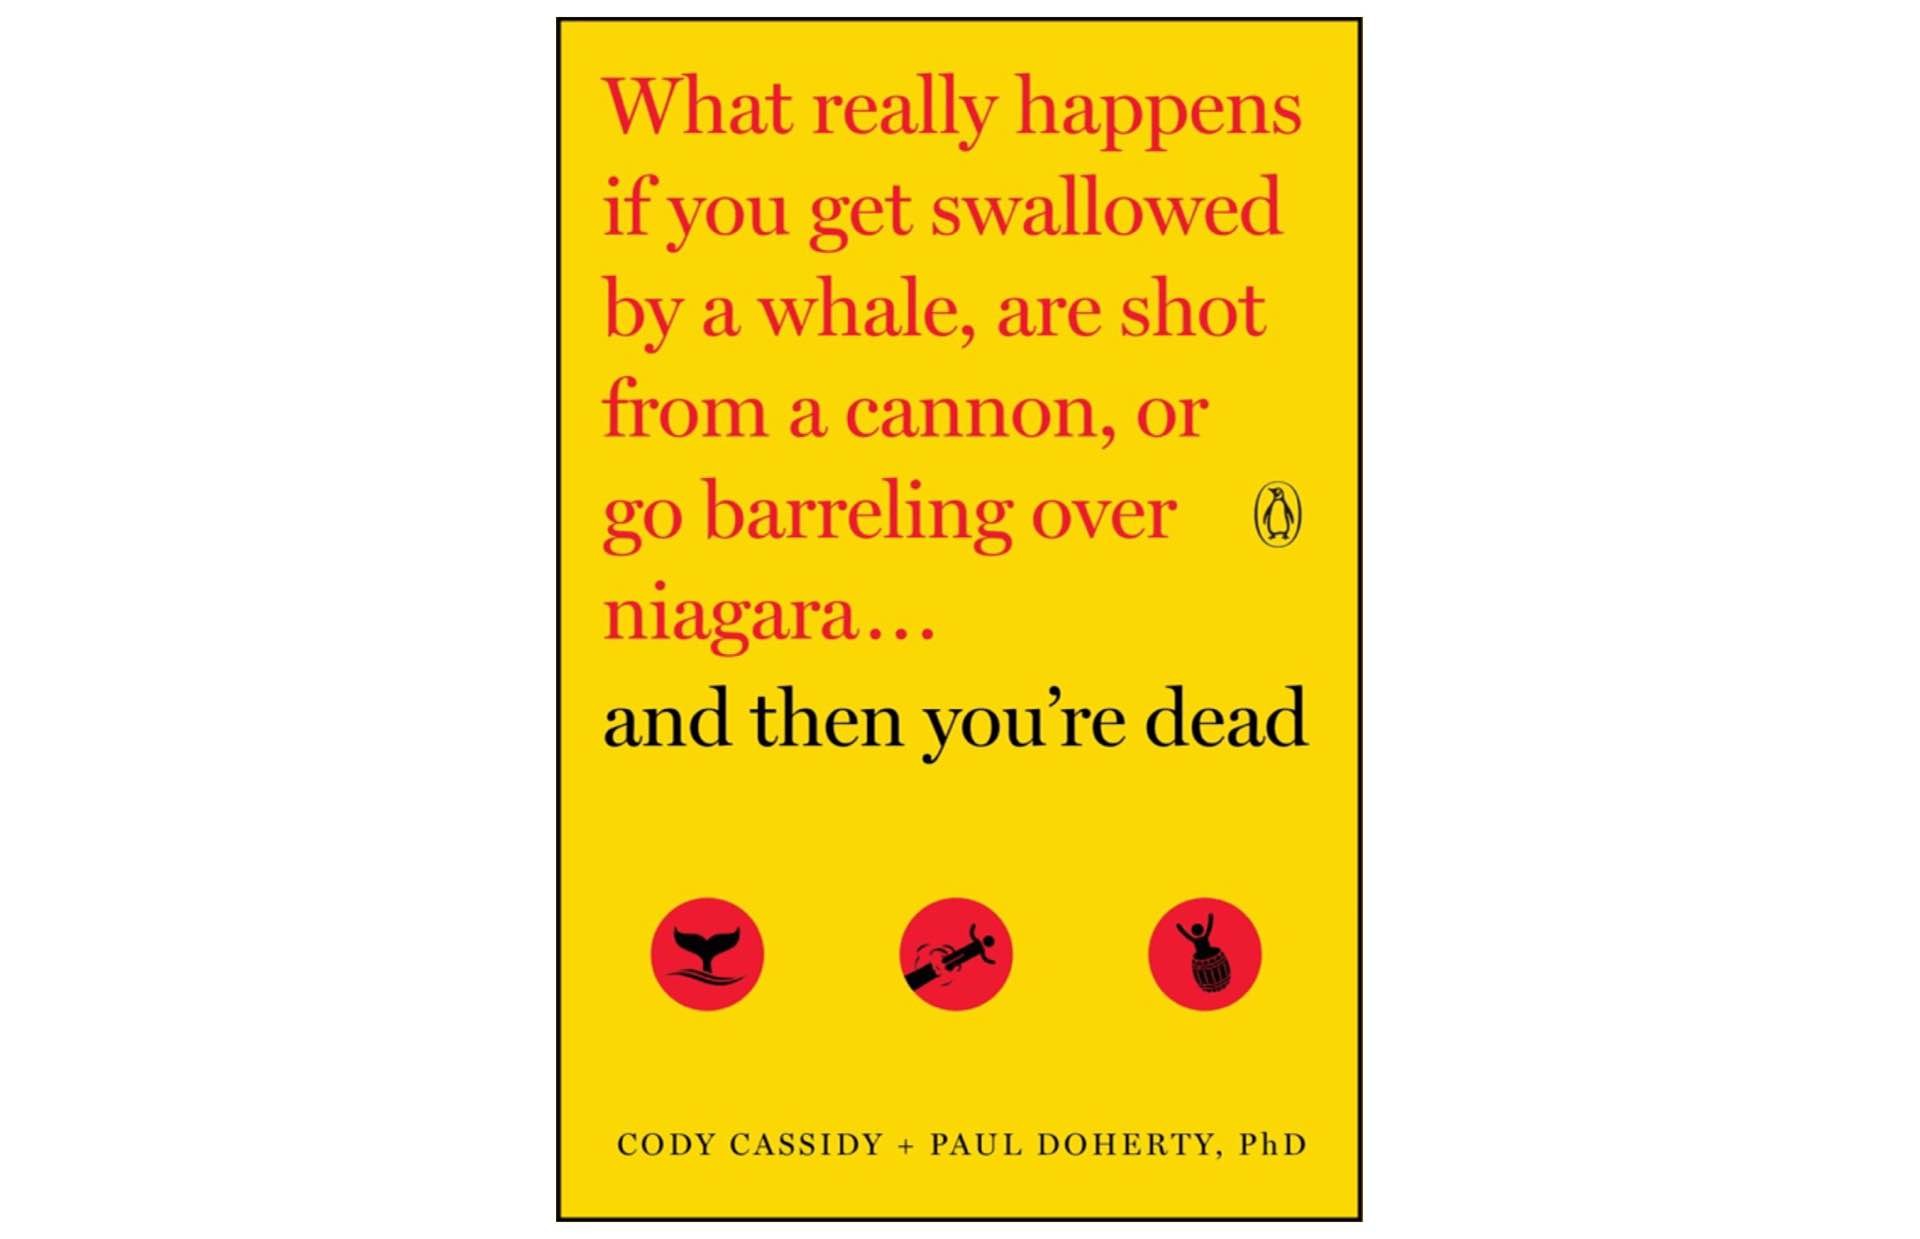 And Then You're Dead by Paul Doherty and Cody Cassidy.